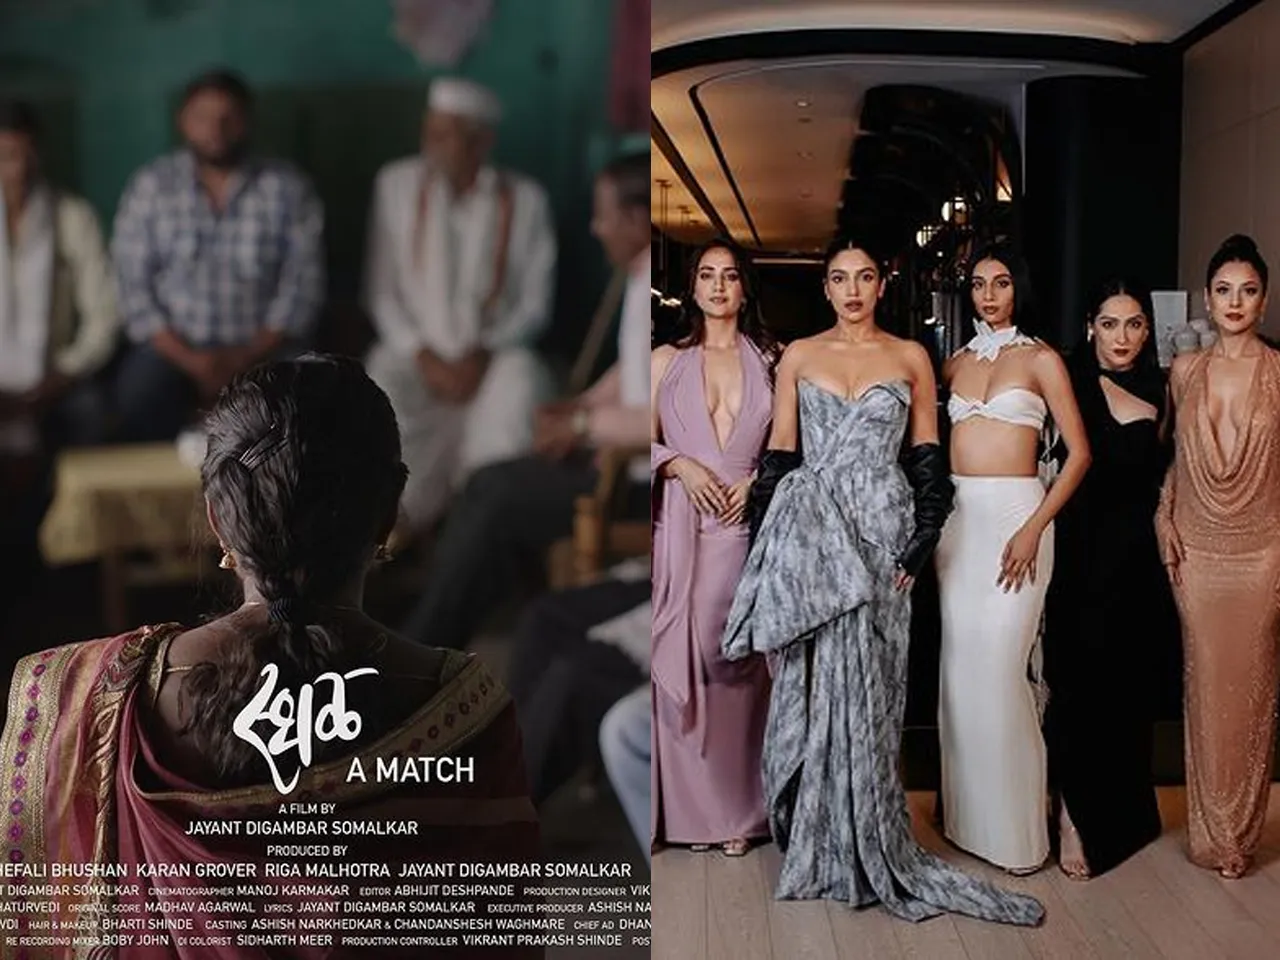 From Sthal and Dear Jassic bagging awards to Thank You for Coming getting a standing ovation, here’s how Indian films made an impact at TIFF this year!